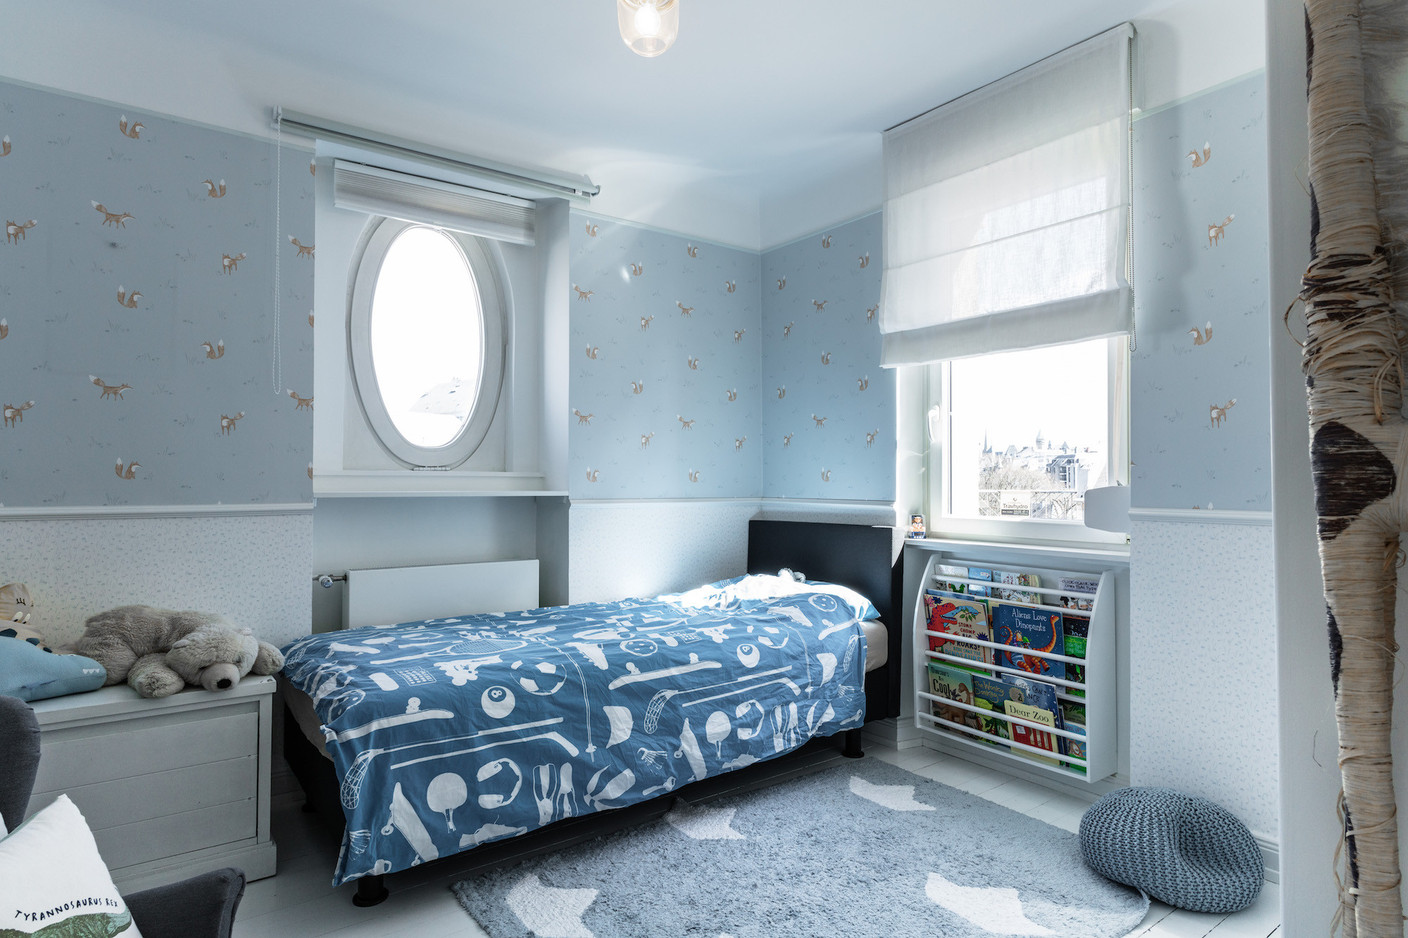 One of the smaller bedrooms, transformed into a children’s bedroom, after restoration work was finished. Photo provided by Aatika Hayat